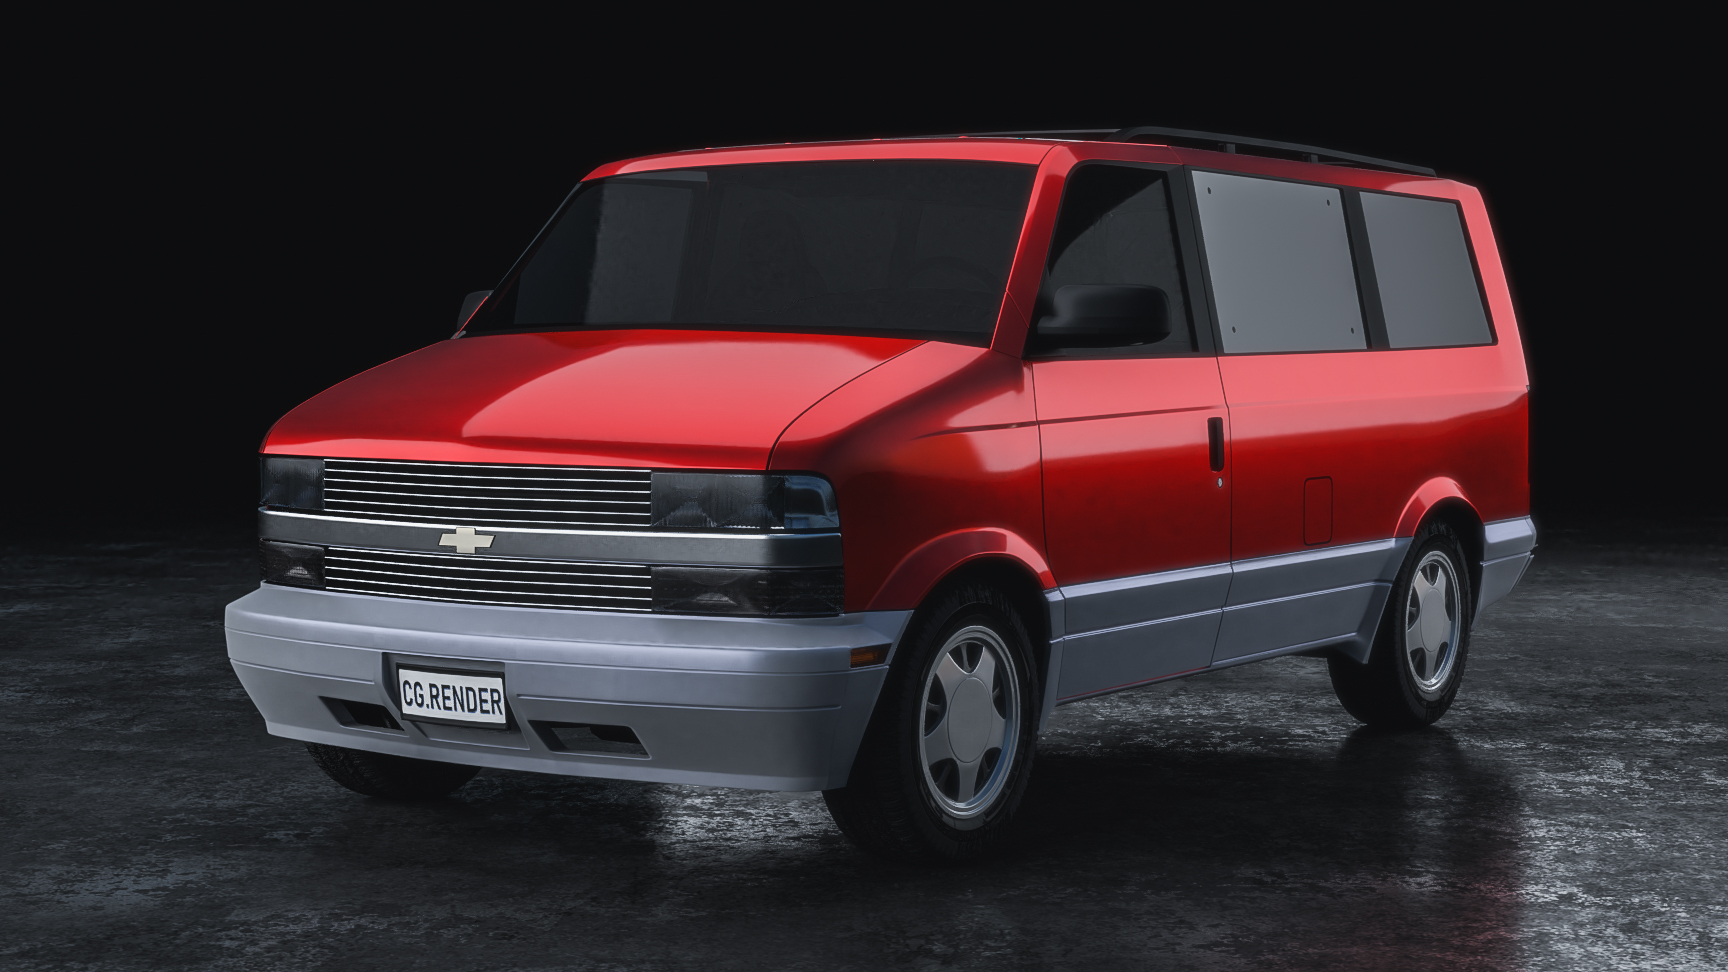 Chevrolet Astro 1999 - Finished Projects - Blender Artists Community